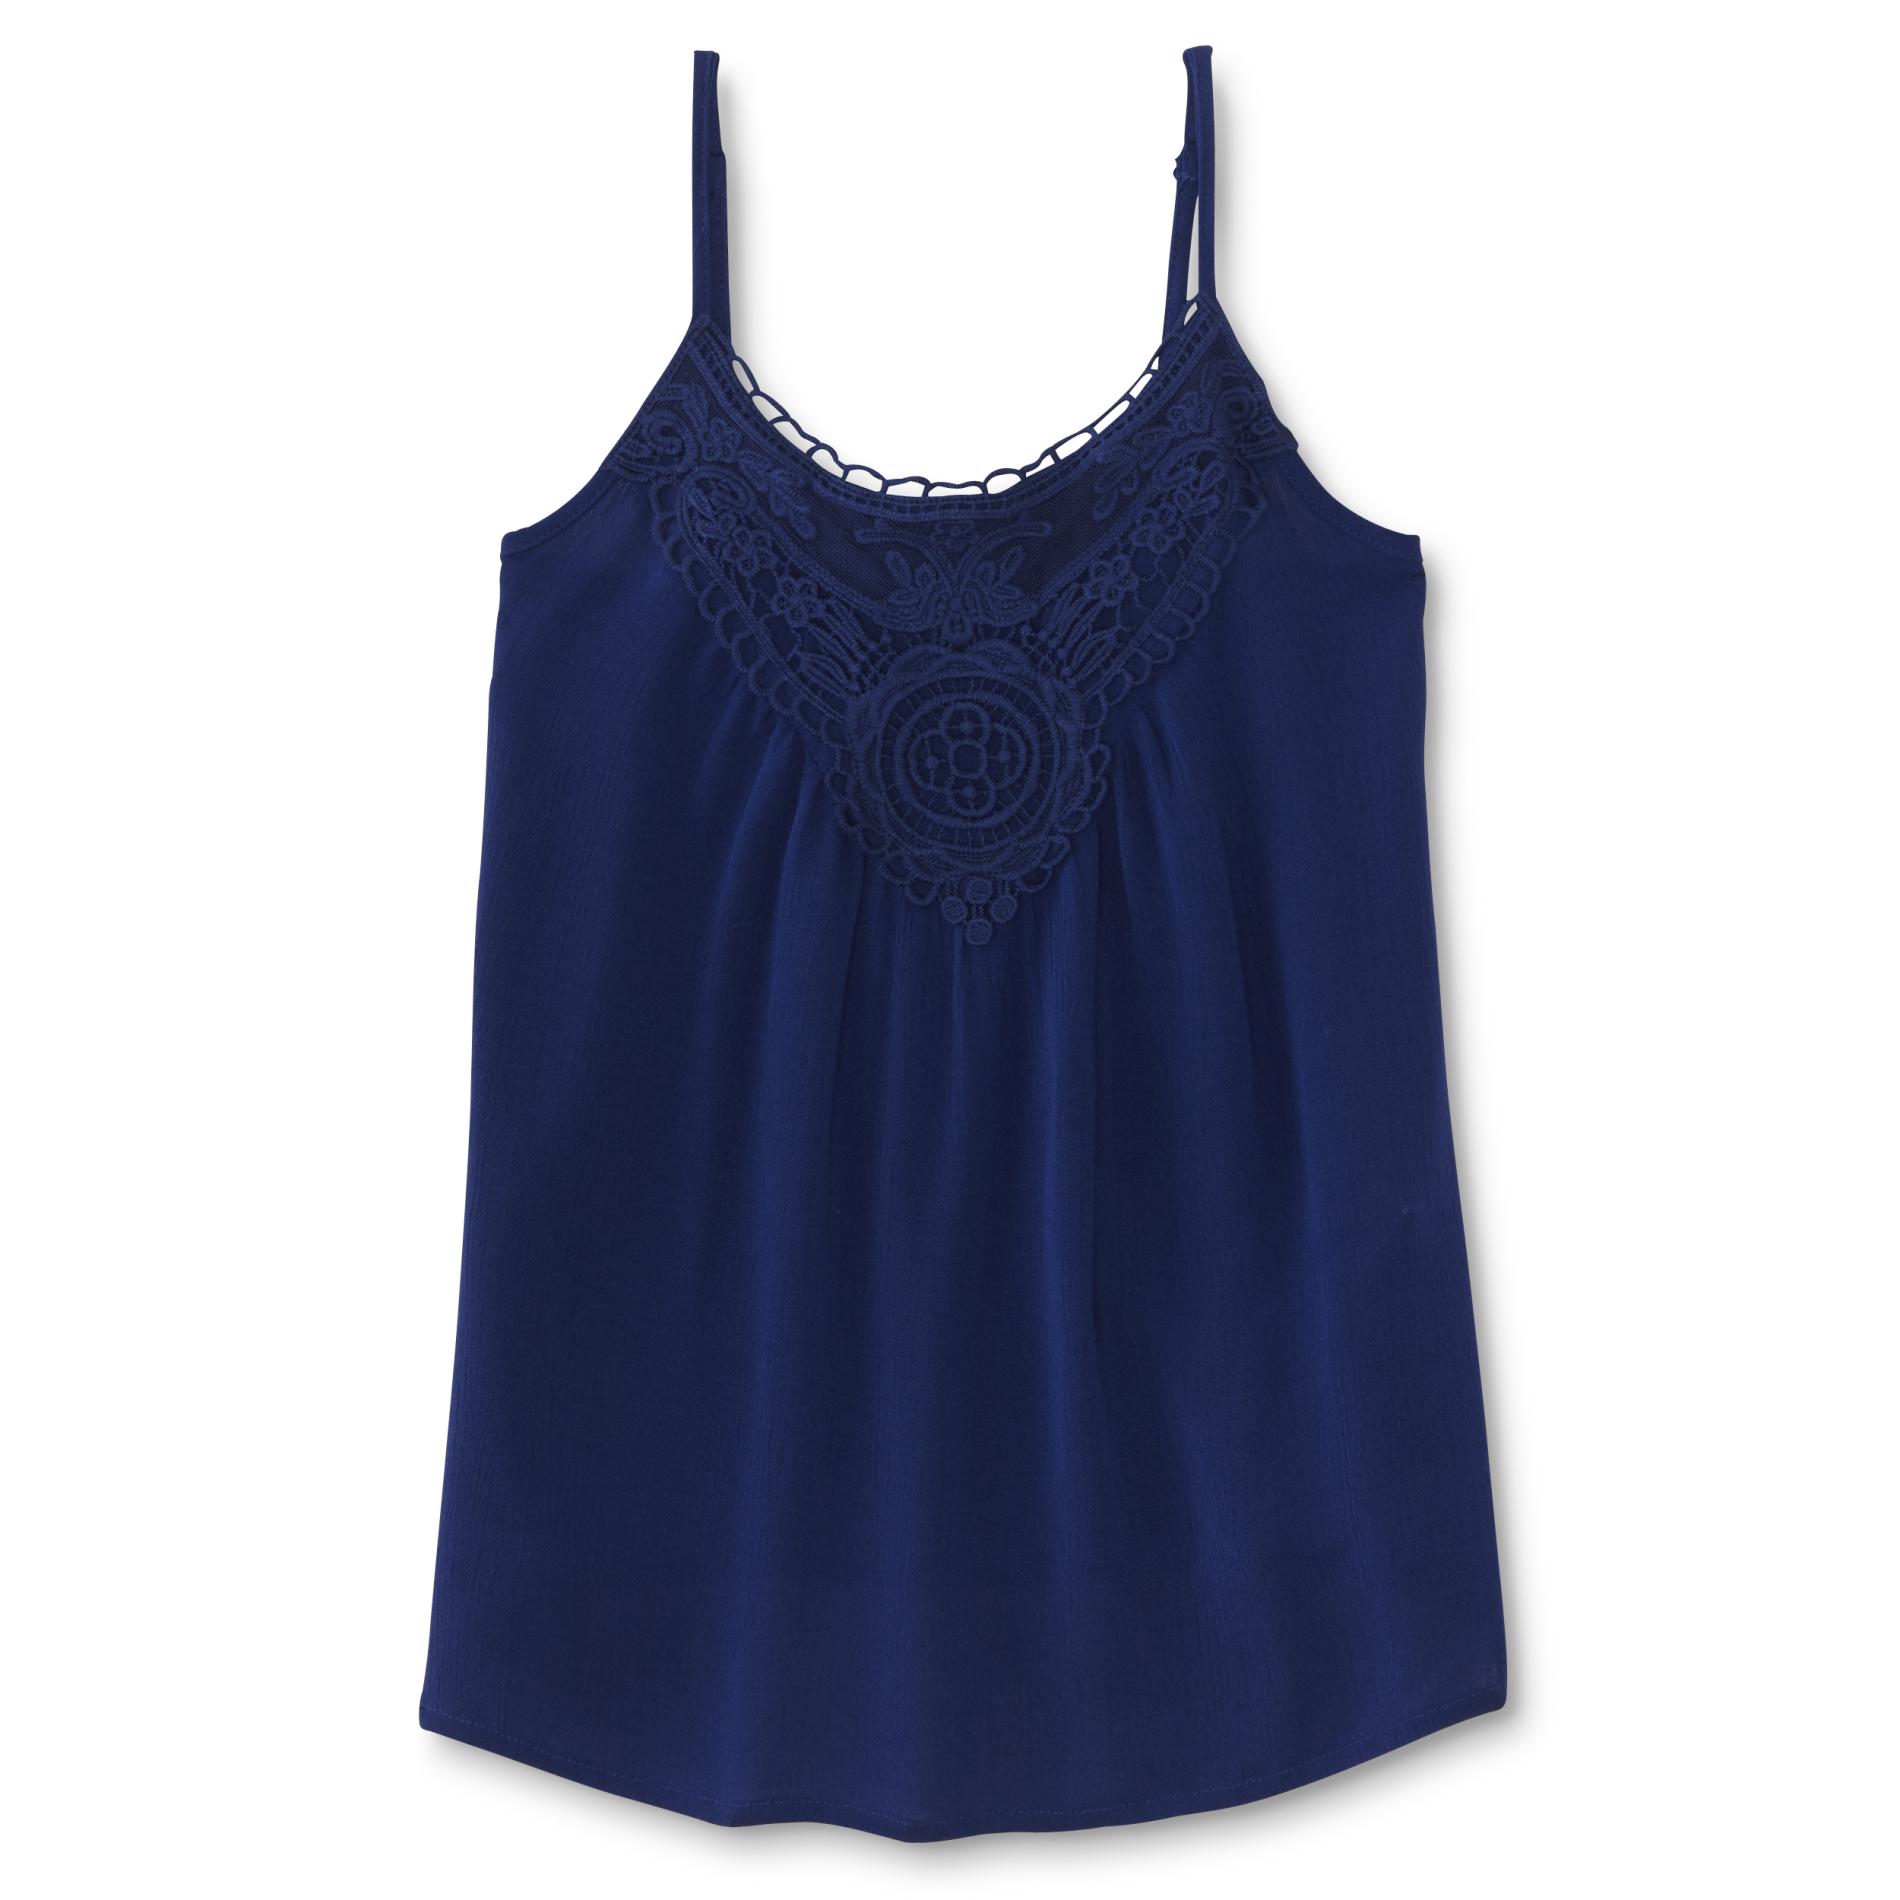 Canyon River Blues Girl's Crochet Camisole